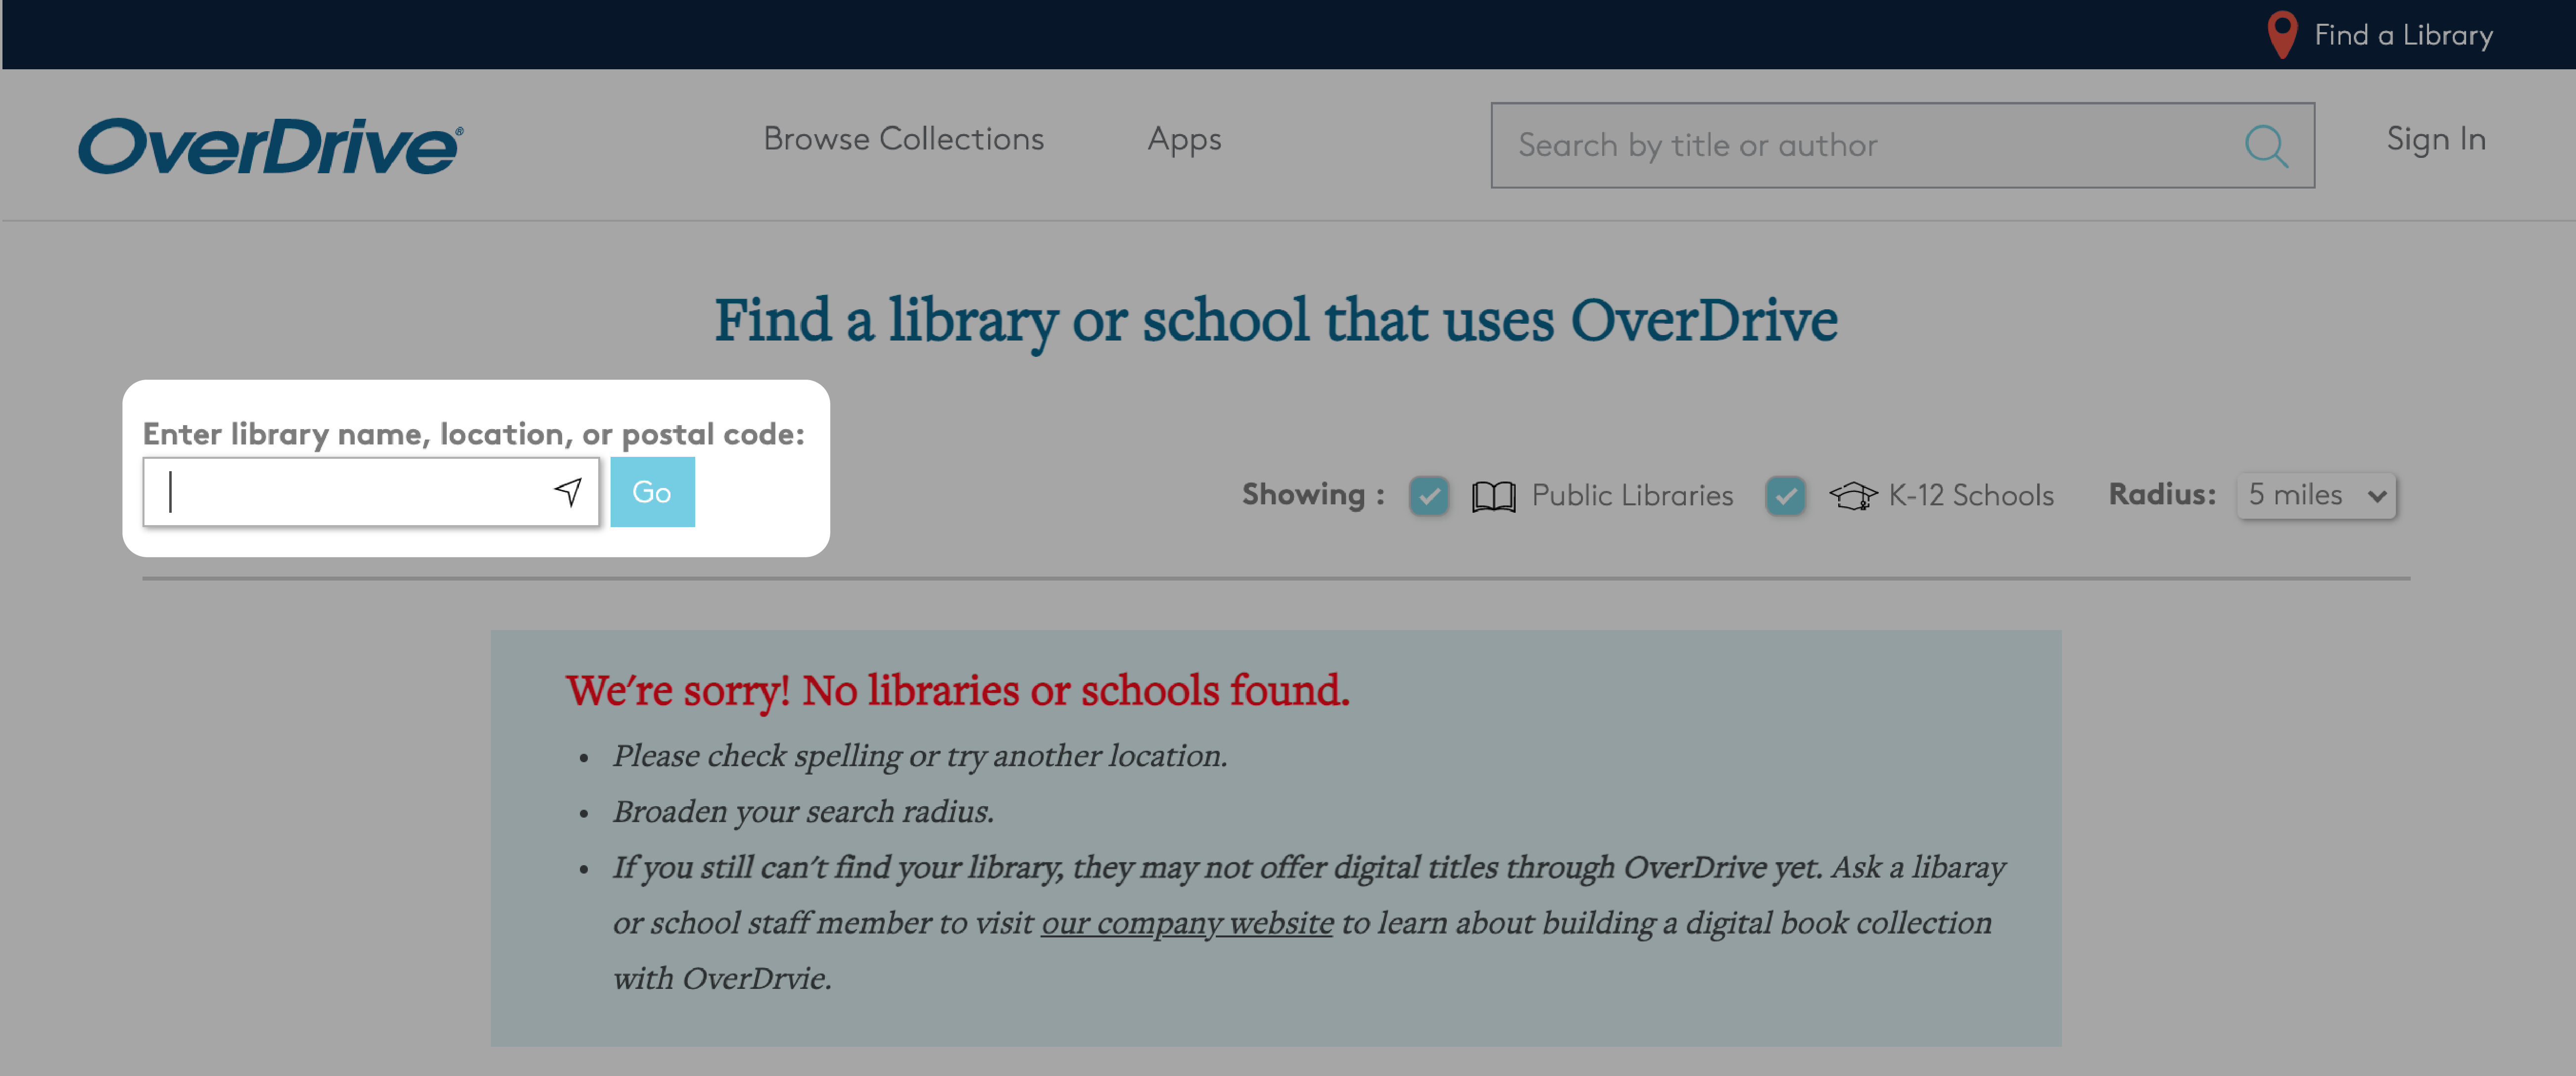 OverDrive_Library_search-01.png